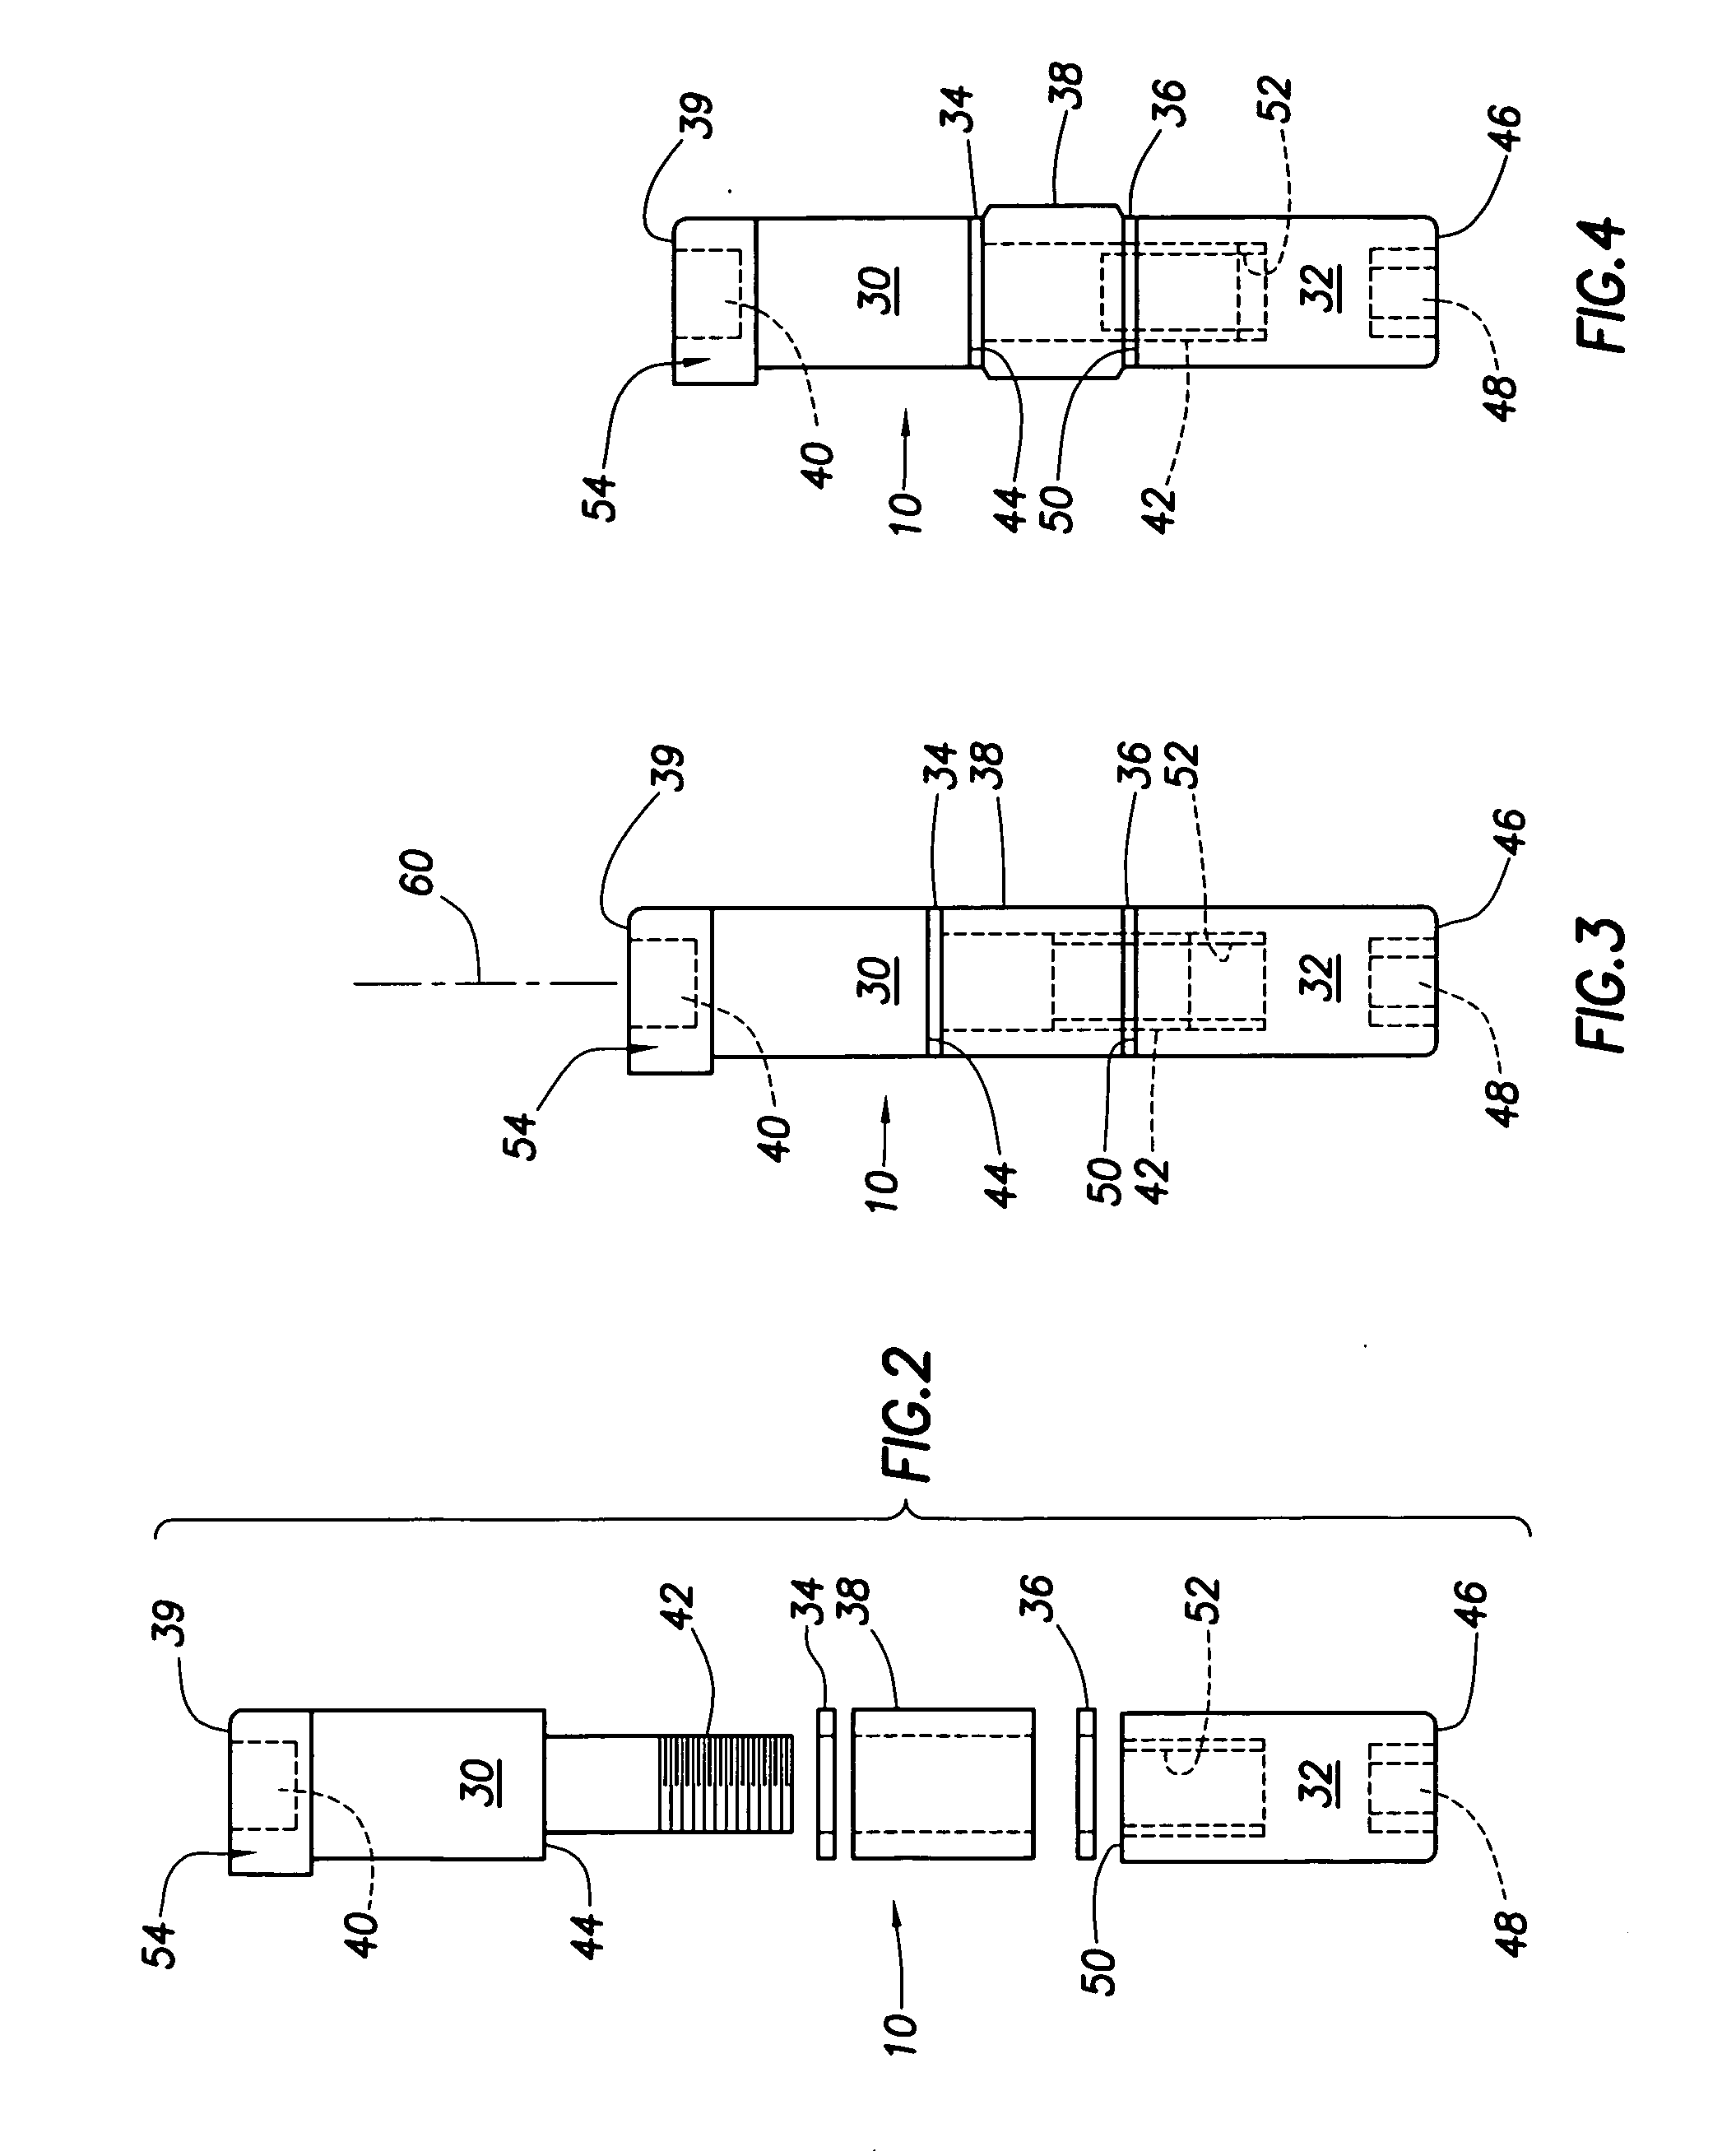 Cammed connector pin assembly and associated excavation apparatus